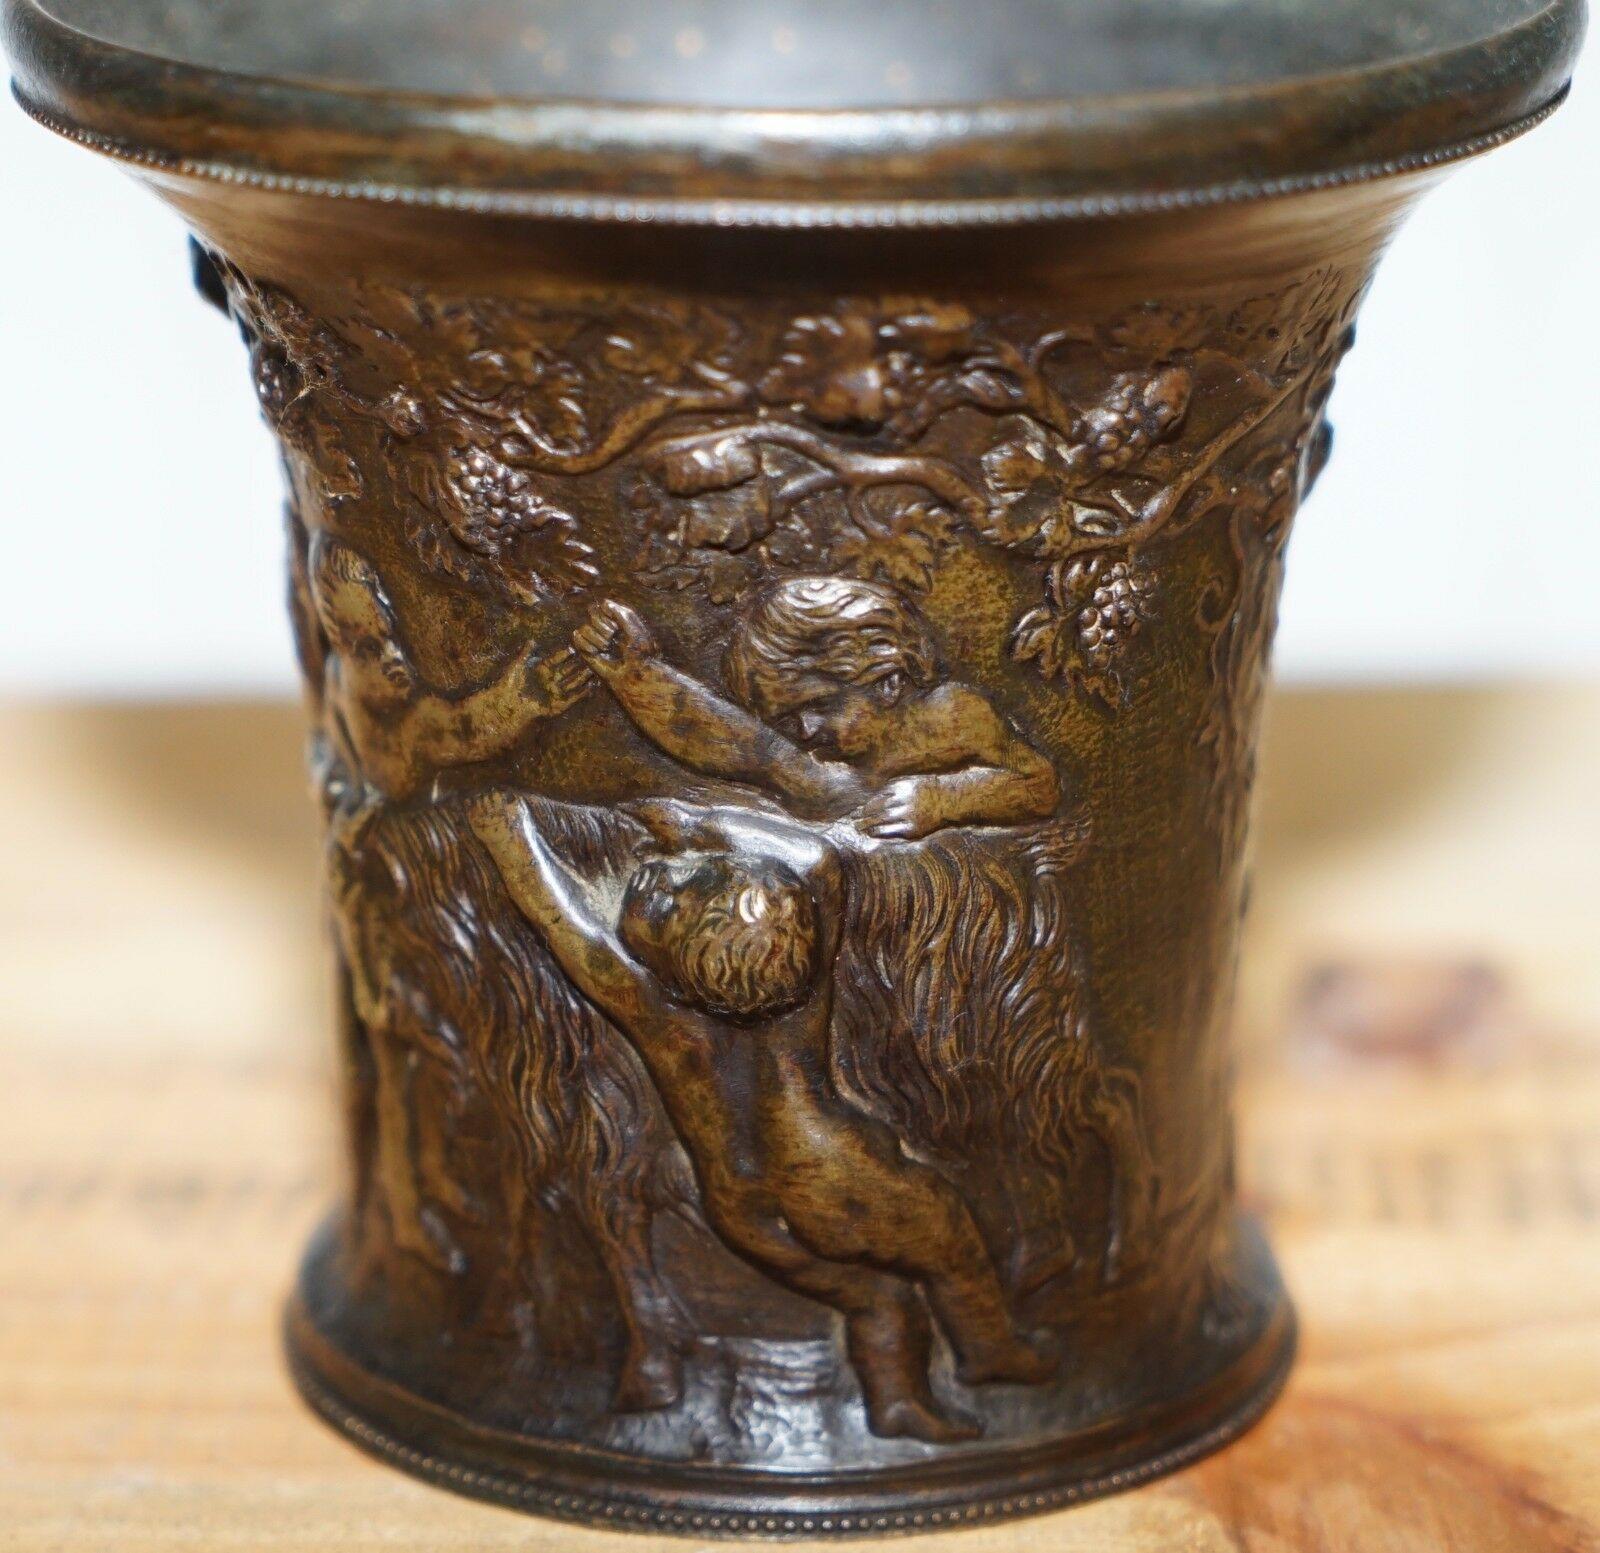 We are delighted to stunning rare 18th century circa 1740 solid bronze small pot

A really very rare and good looking piece in excellent condition for the age

The pot depicts putti or cherubs in a neoclassic form

Dimensions:

Height